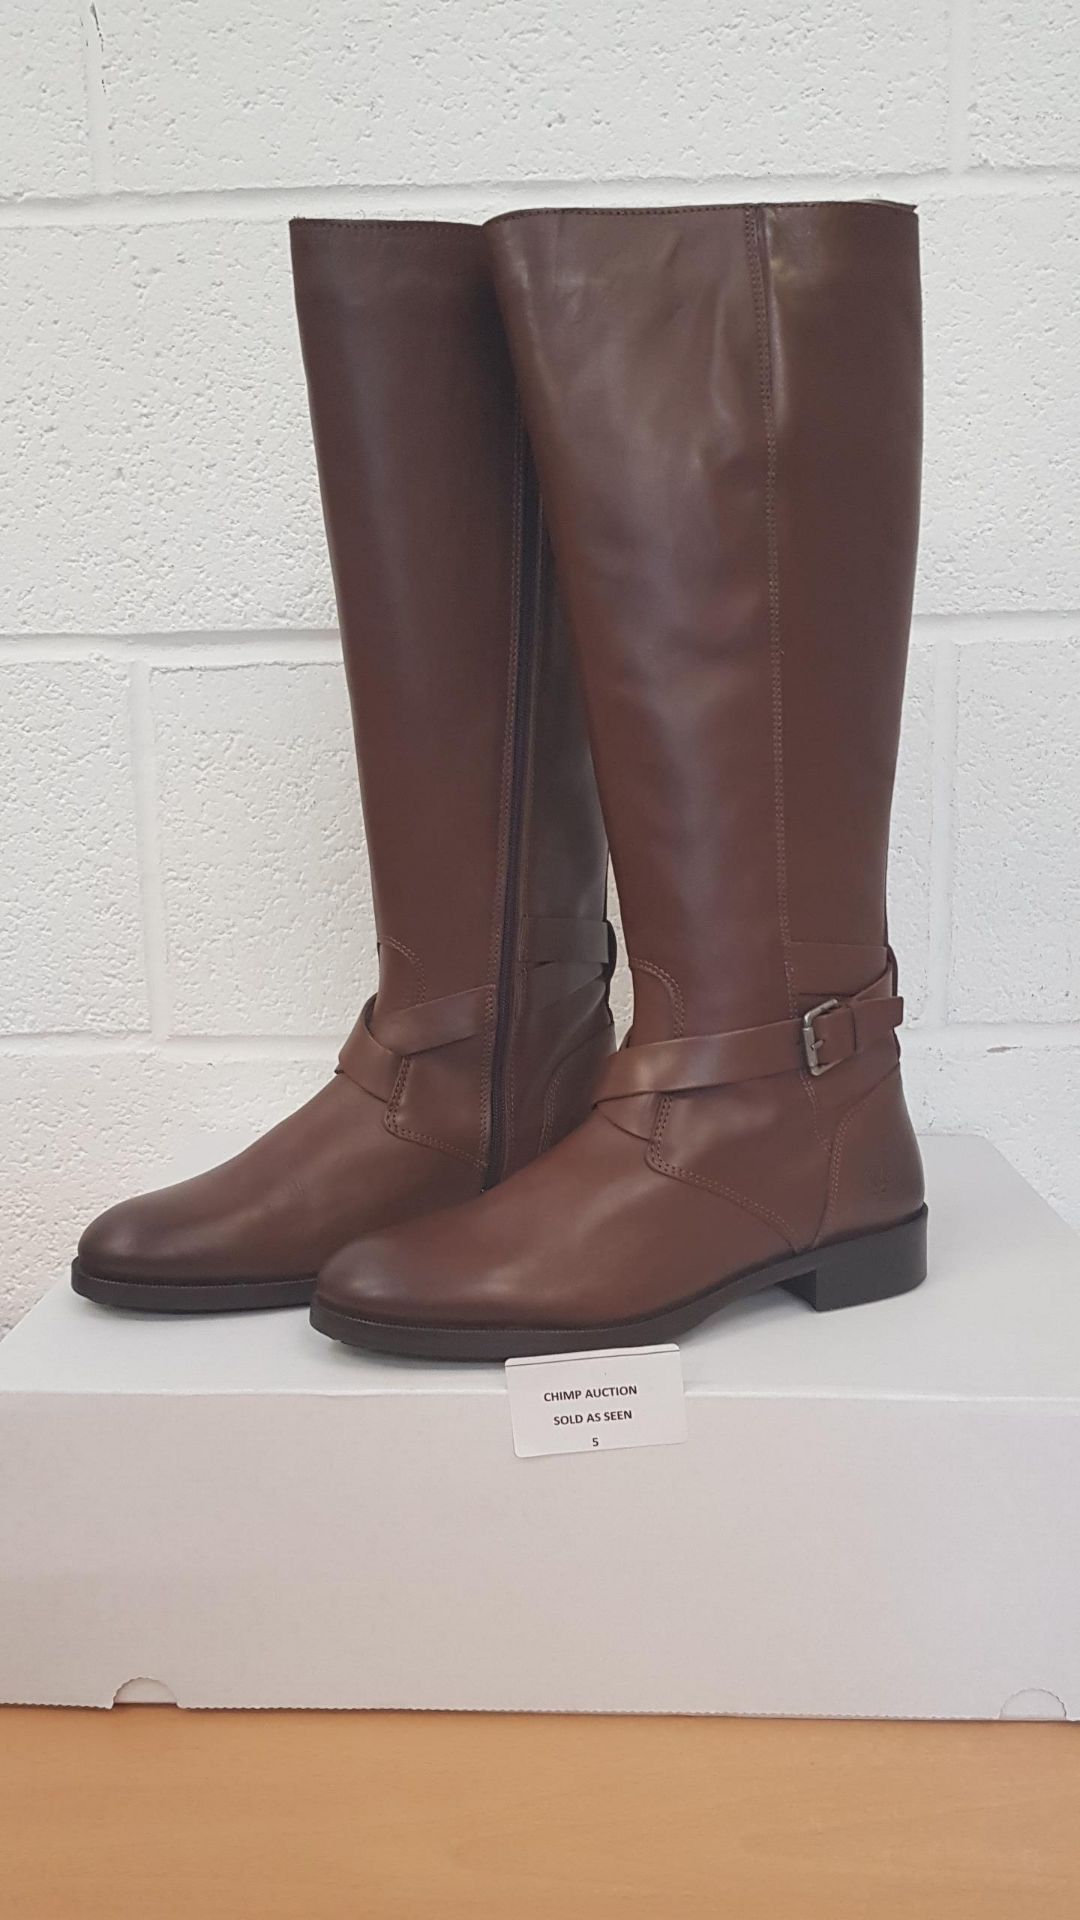 Marc O'Polo ladies leather designer boots UK 6.5 RRP £159.99